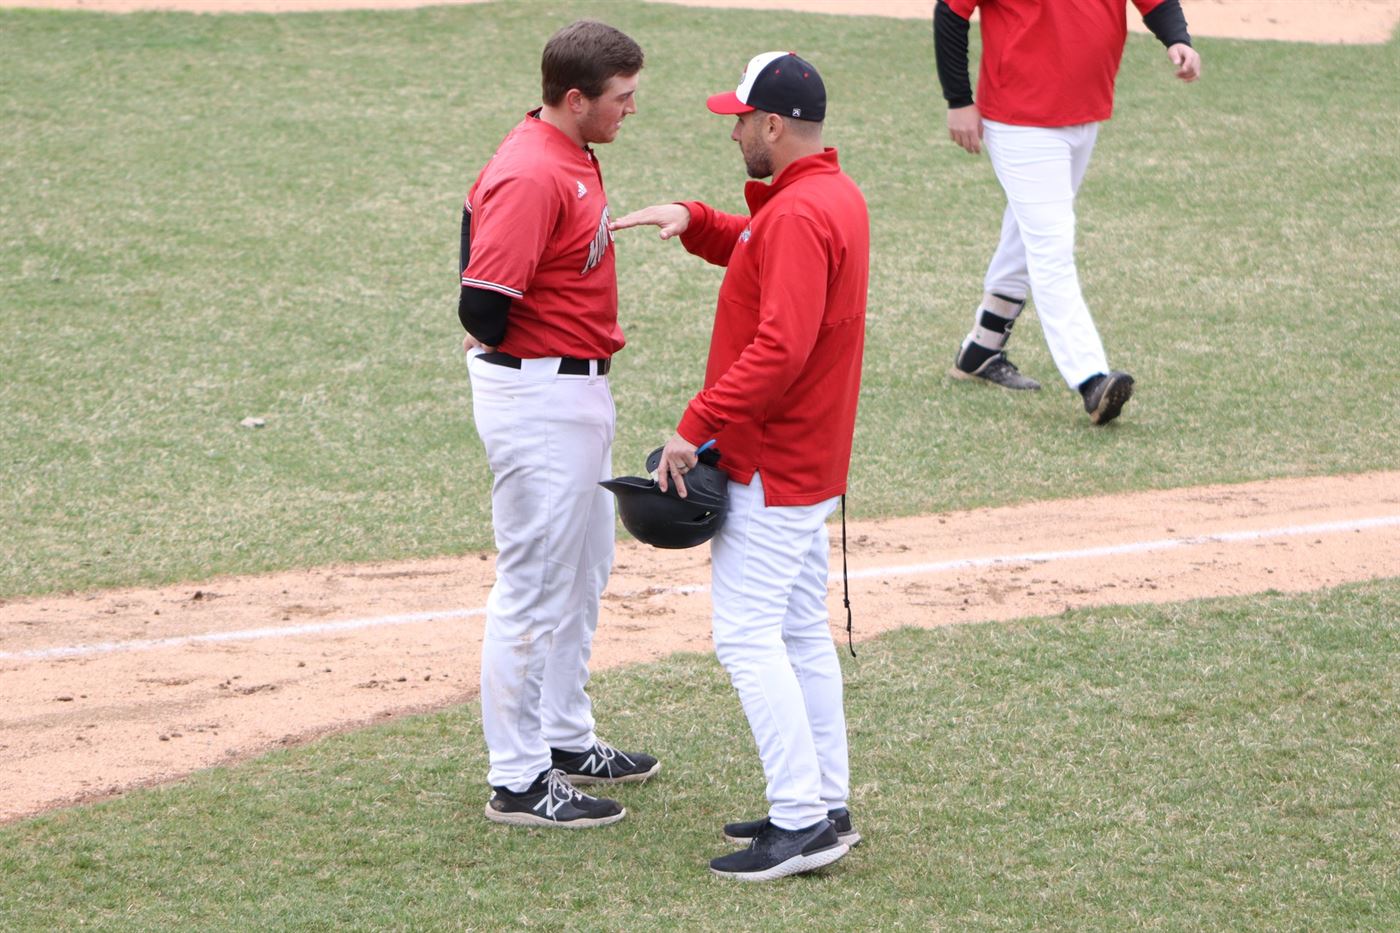 Lorber hopes his tenure at Montclair State is his last stop in his coaching career. Trevor Giesberg | The Montclarion